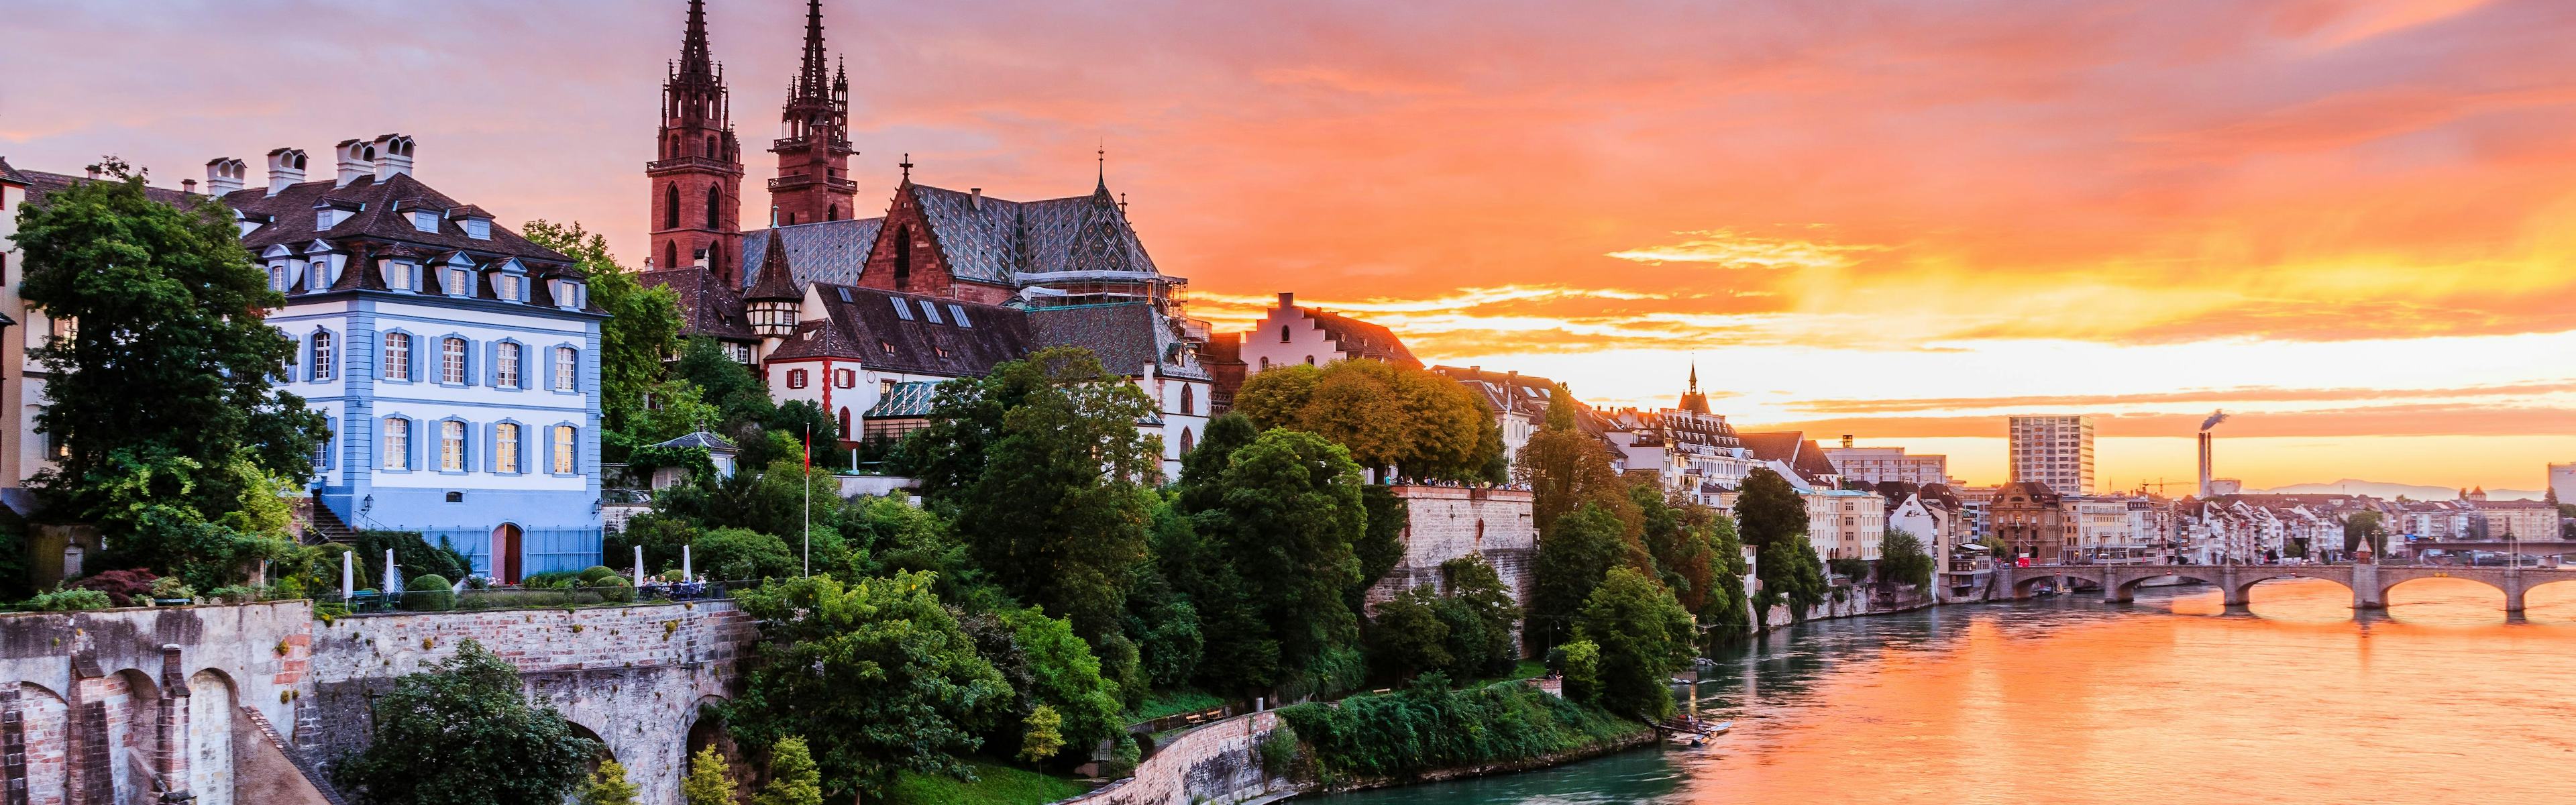 Sunset over the river in Basel, Switzerland